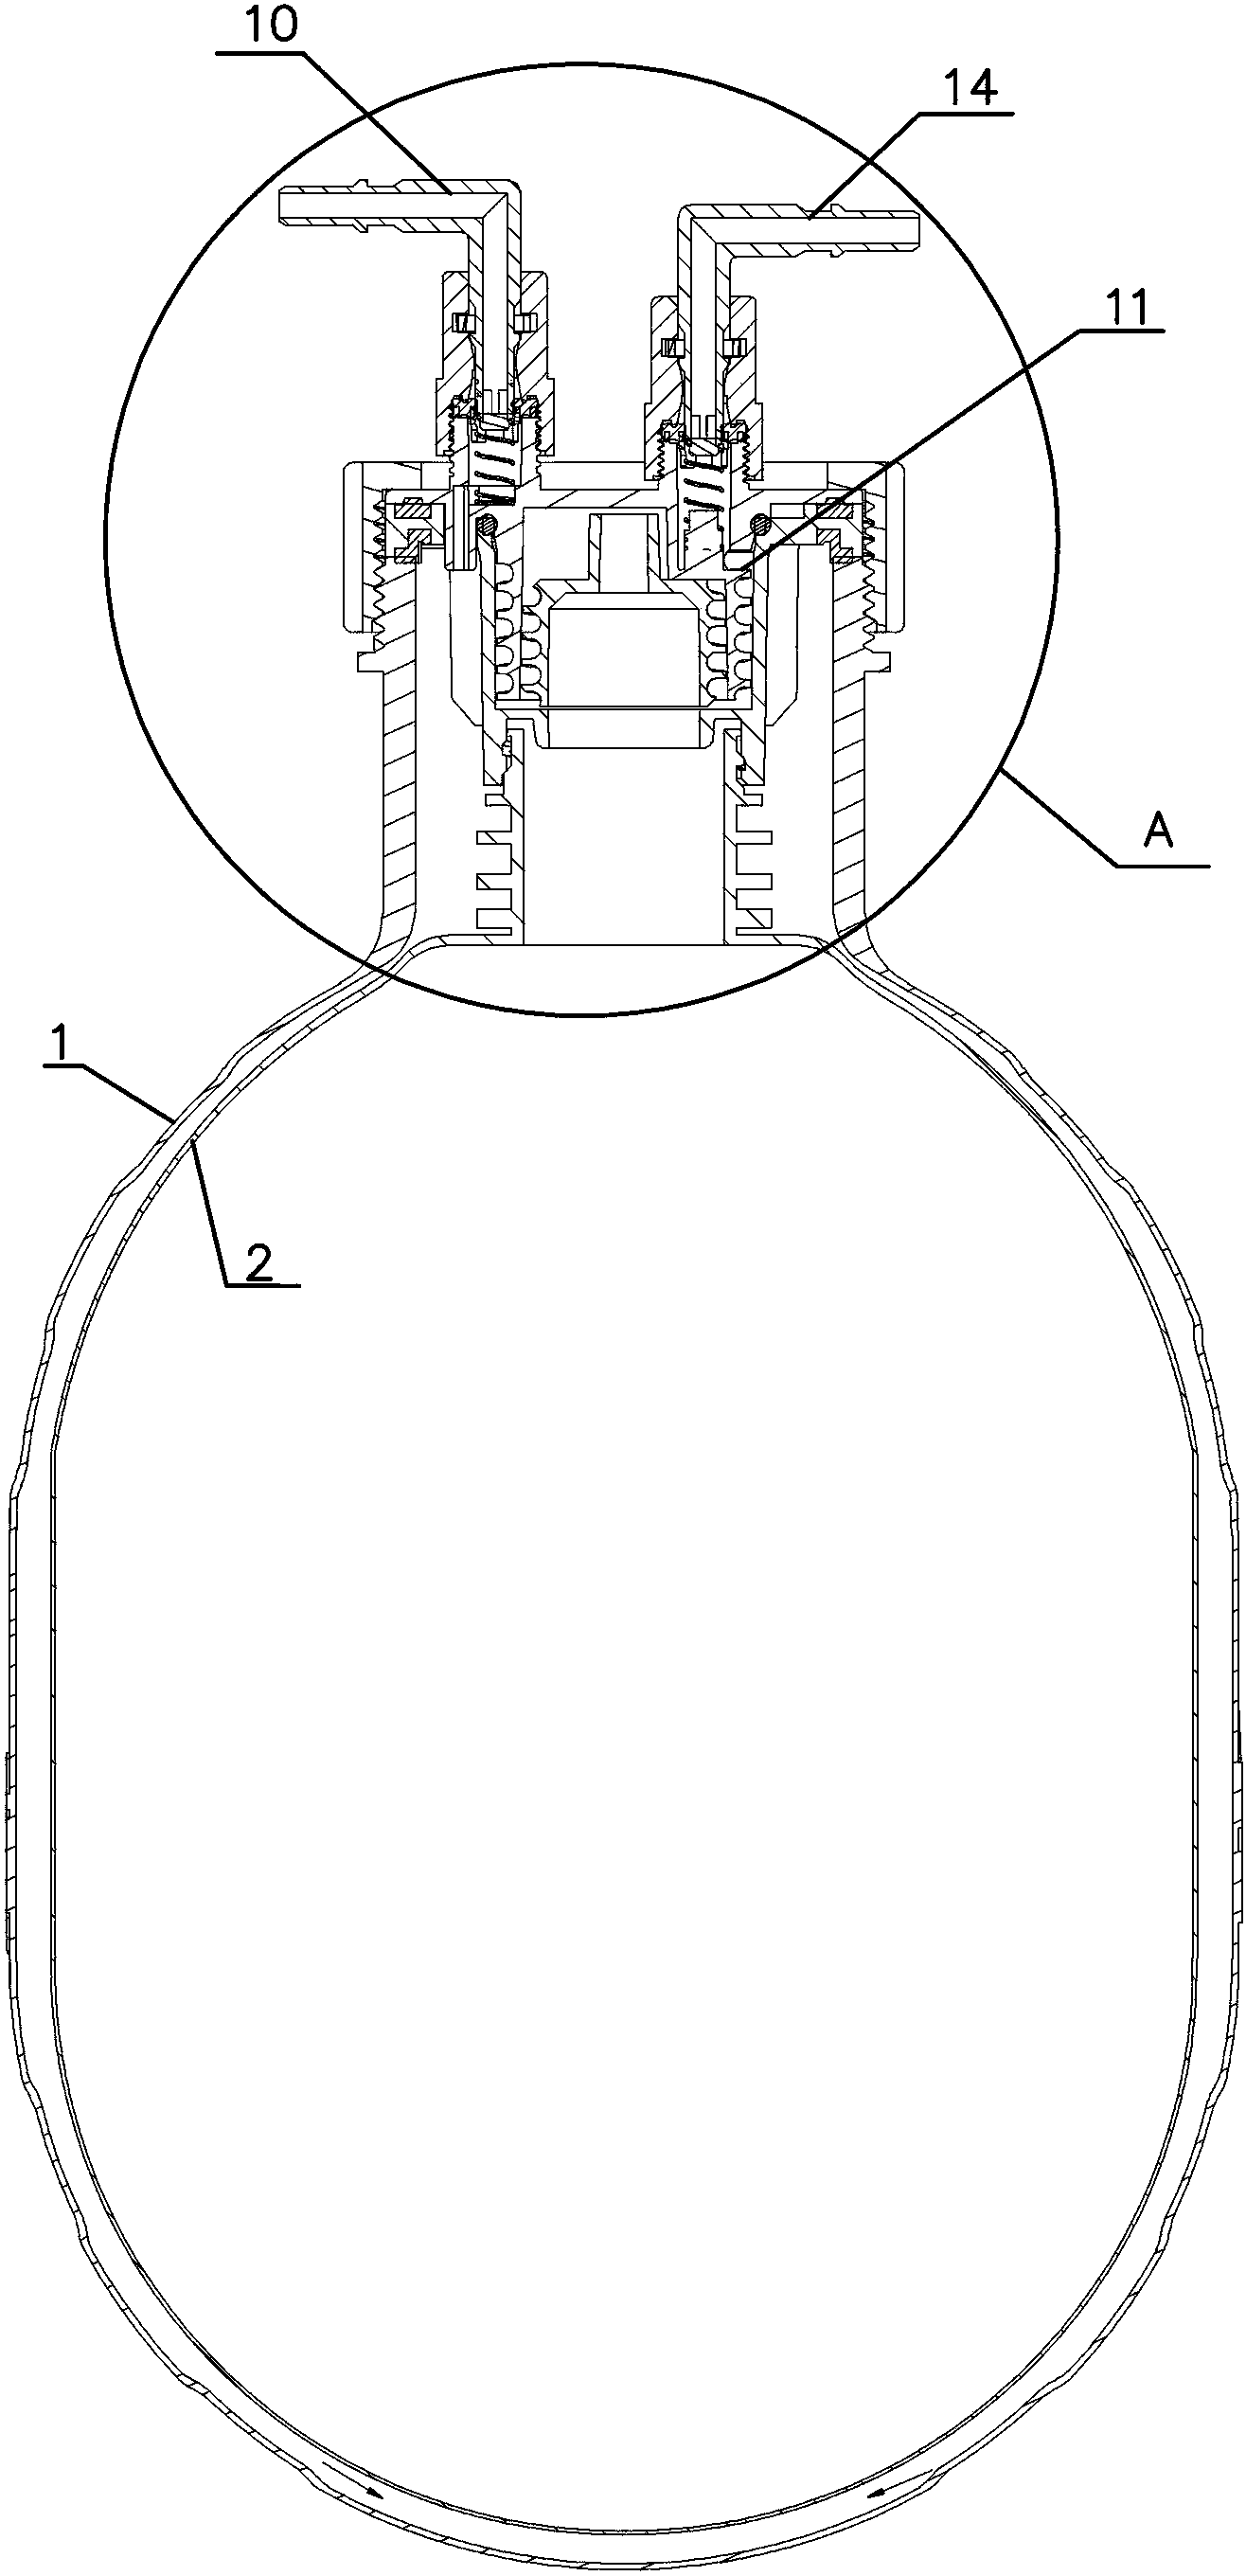 Beer barrel structure provided with valve